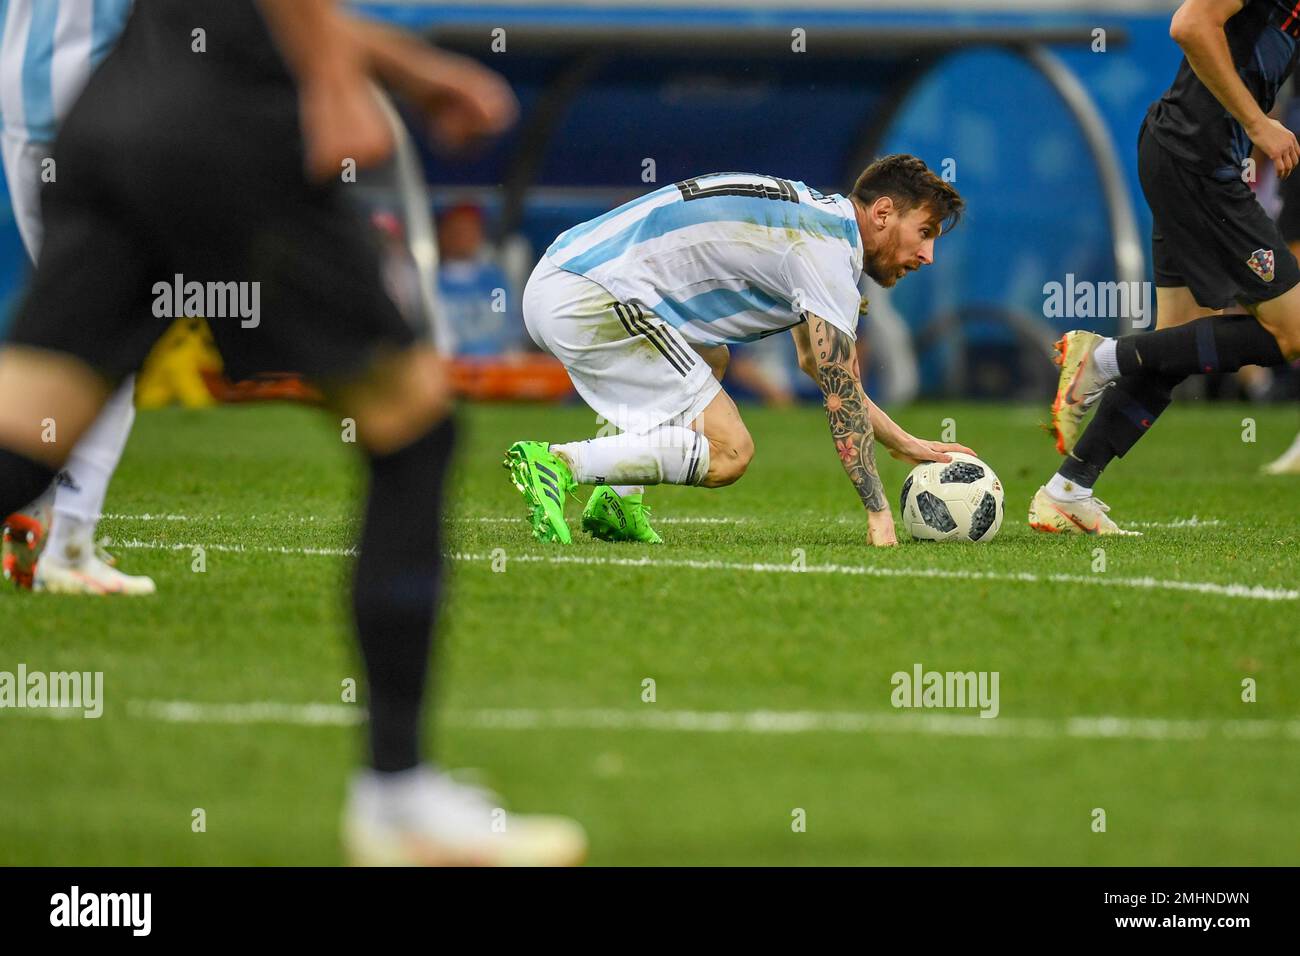 NIZHNIY NOVGOROD, RUSSIA - JUNE 21: Lionel Messi of Argentina during the 2018 FIFA World Cup Russia group D match between Argentina and Croatia Stock Photo